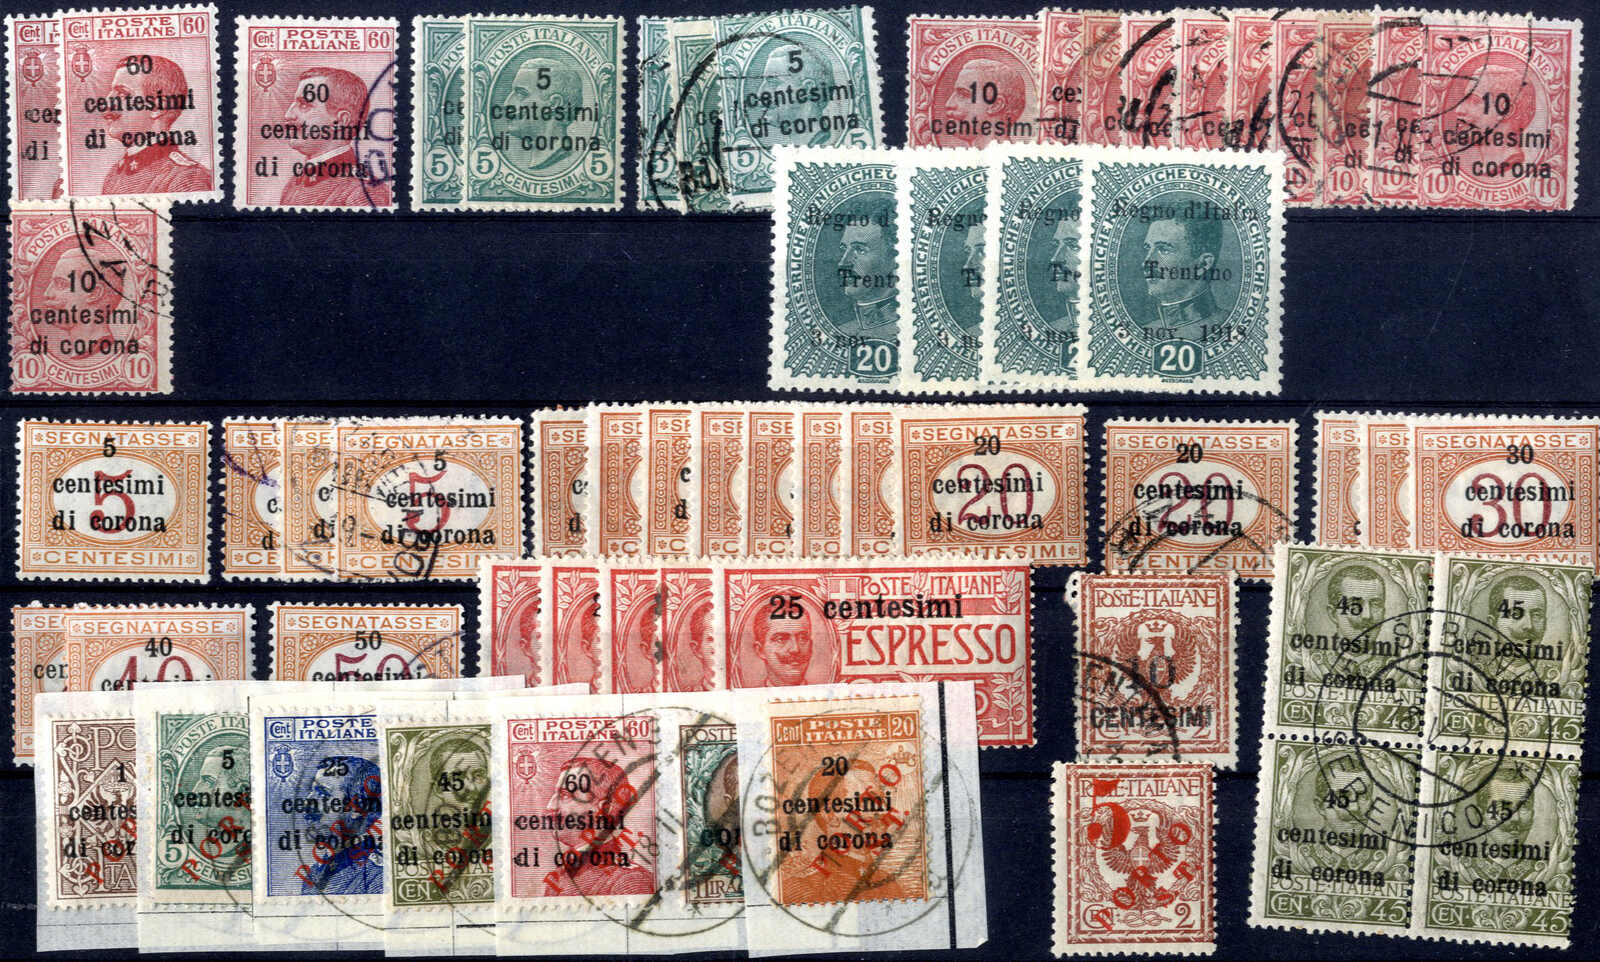 Lot 1755 - Lots and Collections Collections and Lots Italy Occupation 1918/23 -  Viennafil Auktionen Auction #73 Worldwide Mail Auction: Italy, Austria, Germany, Europe and Overseas